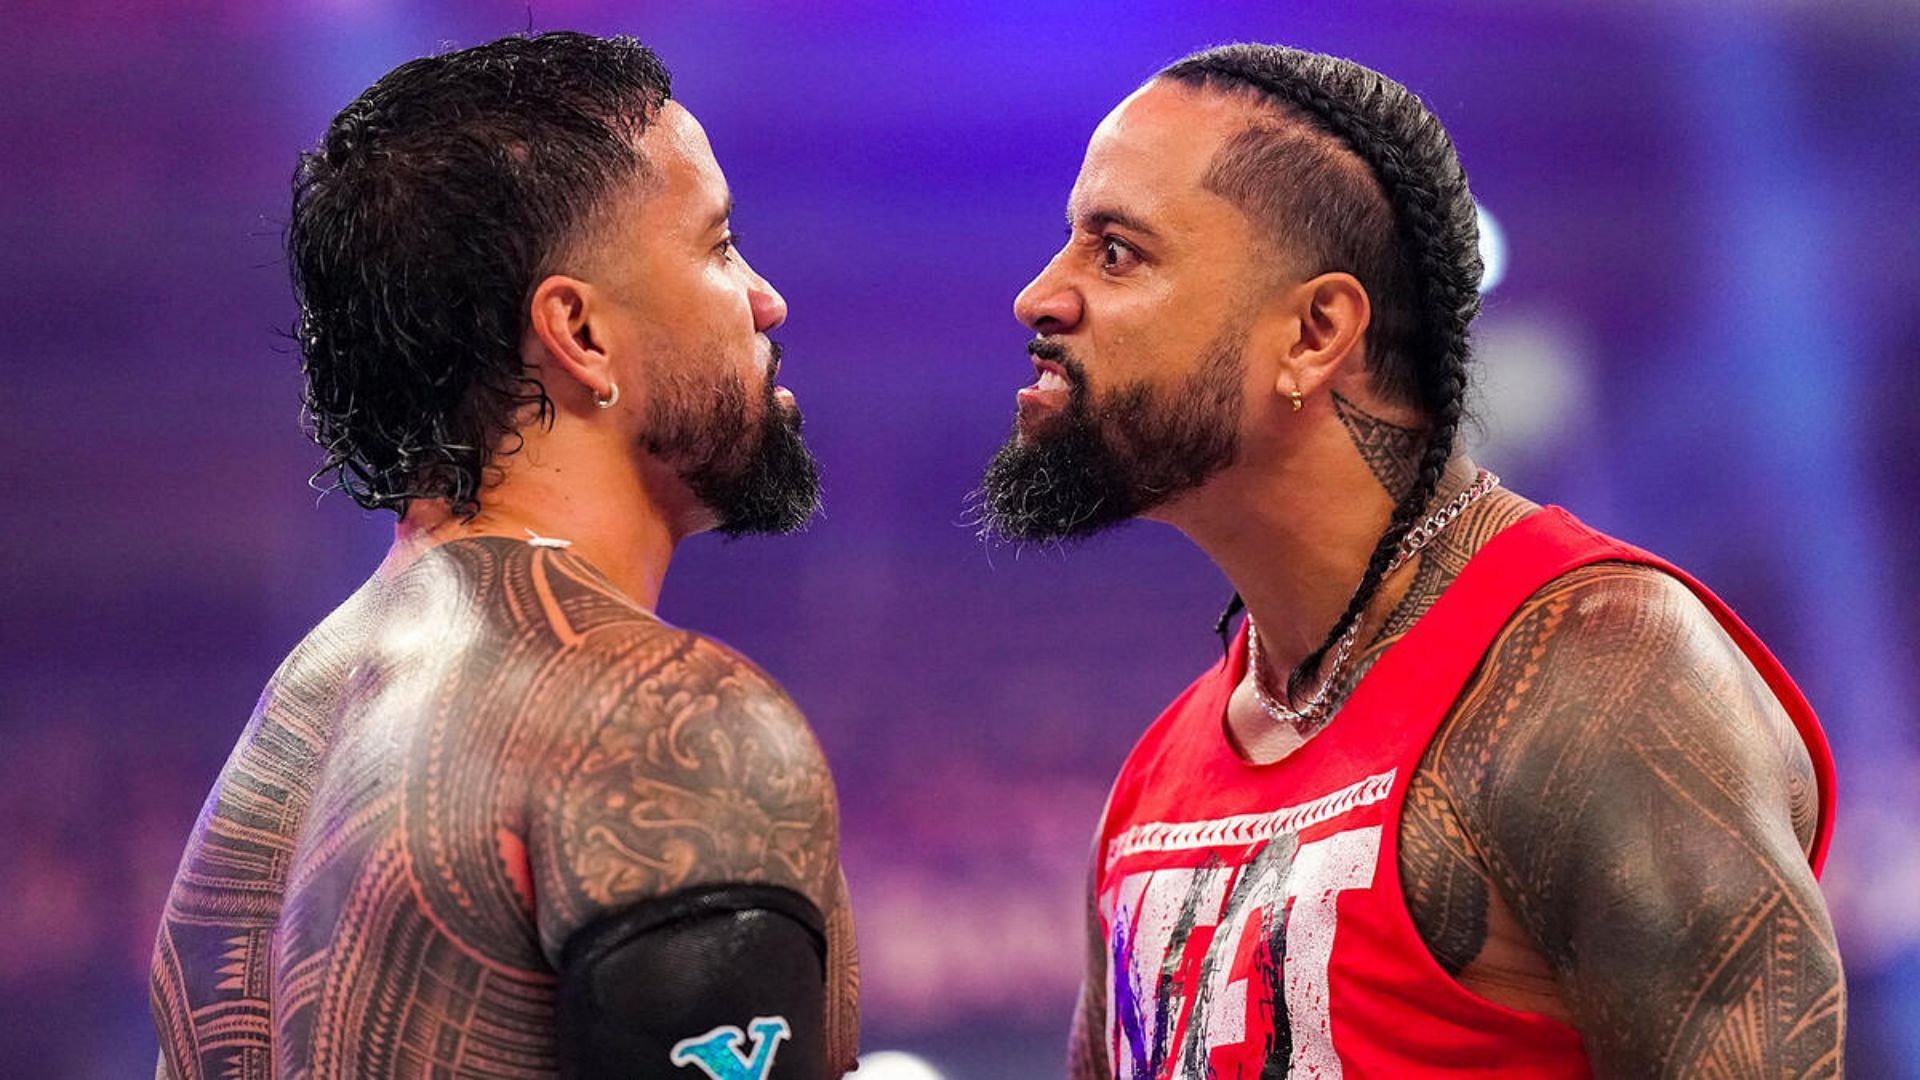 Jey Uso and Jimmy Uso are real-life twins [Image credits: wwe.com]